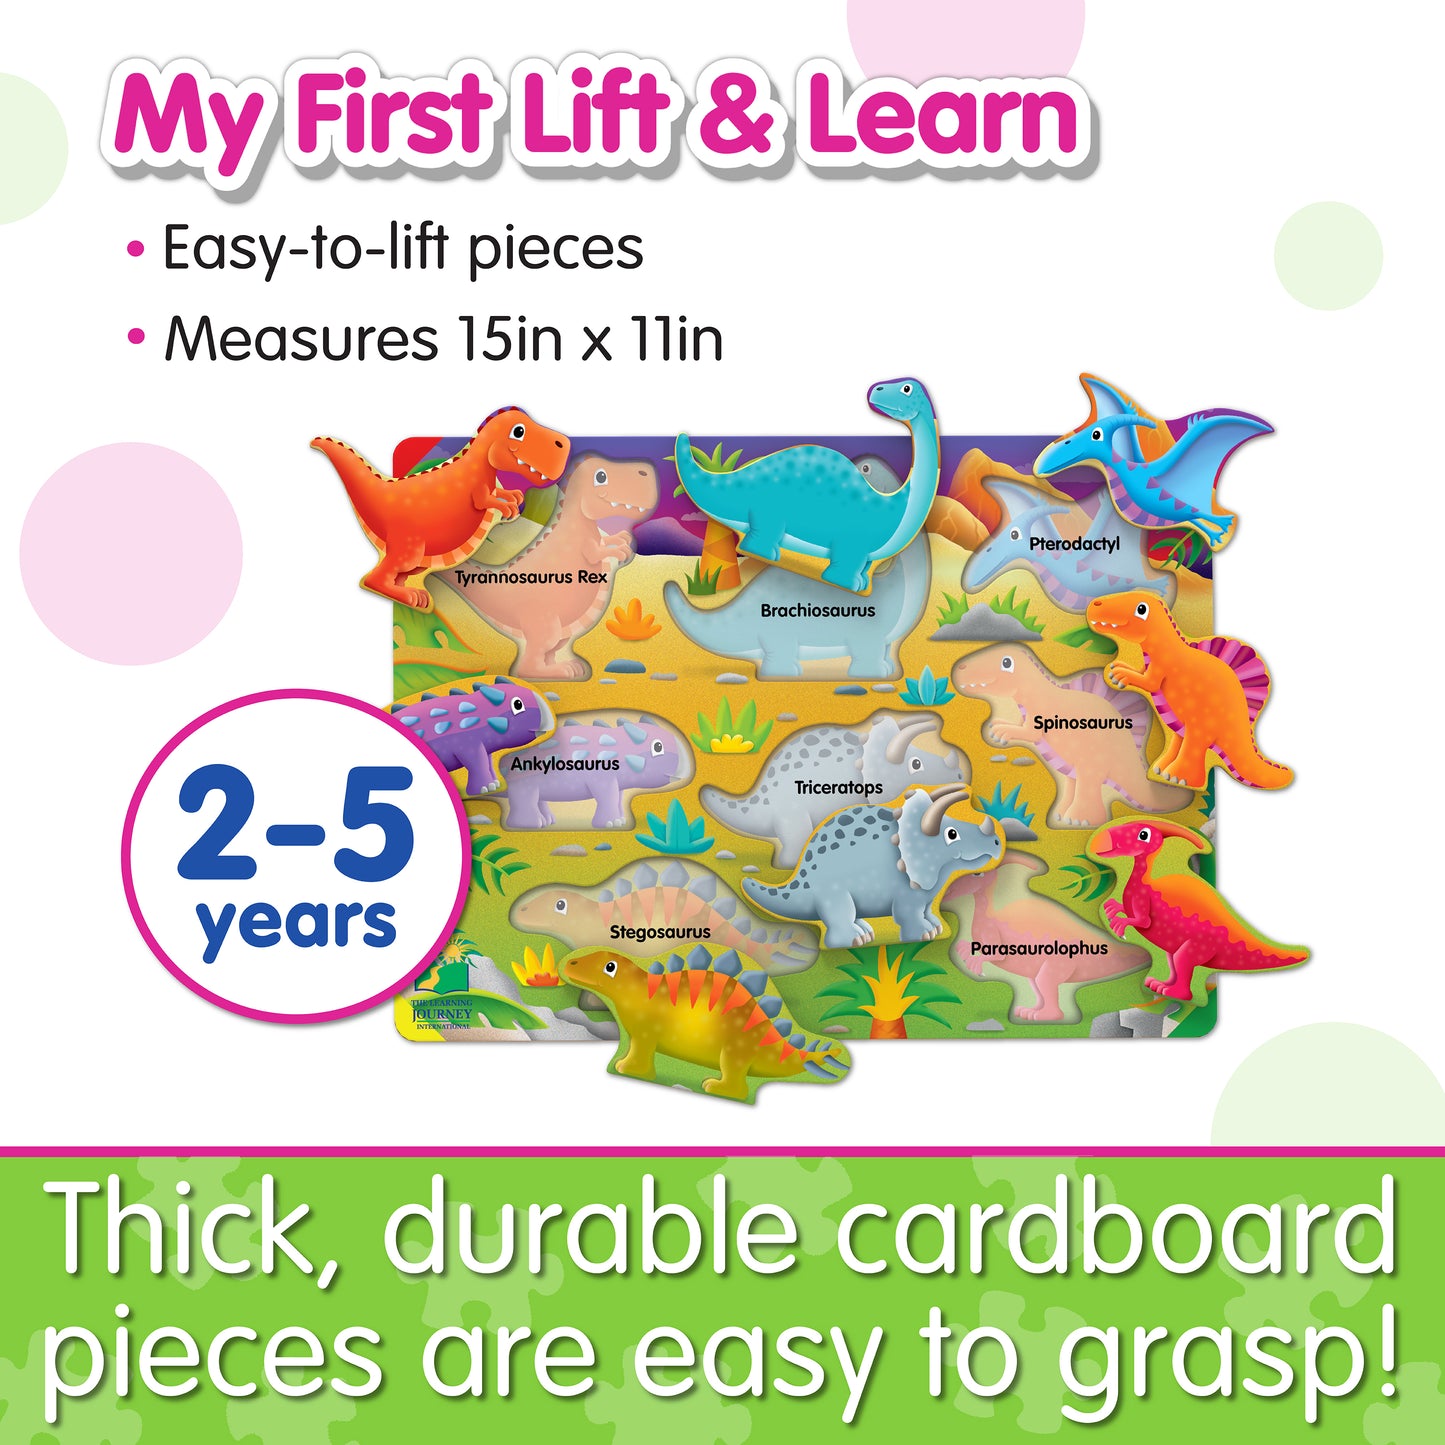 Infographic about My First Lift and Learn Dinosaur Puzzle's features that says, "Thick, durable cardboard pieces are easy to grasp!"